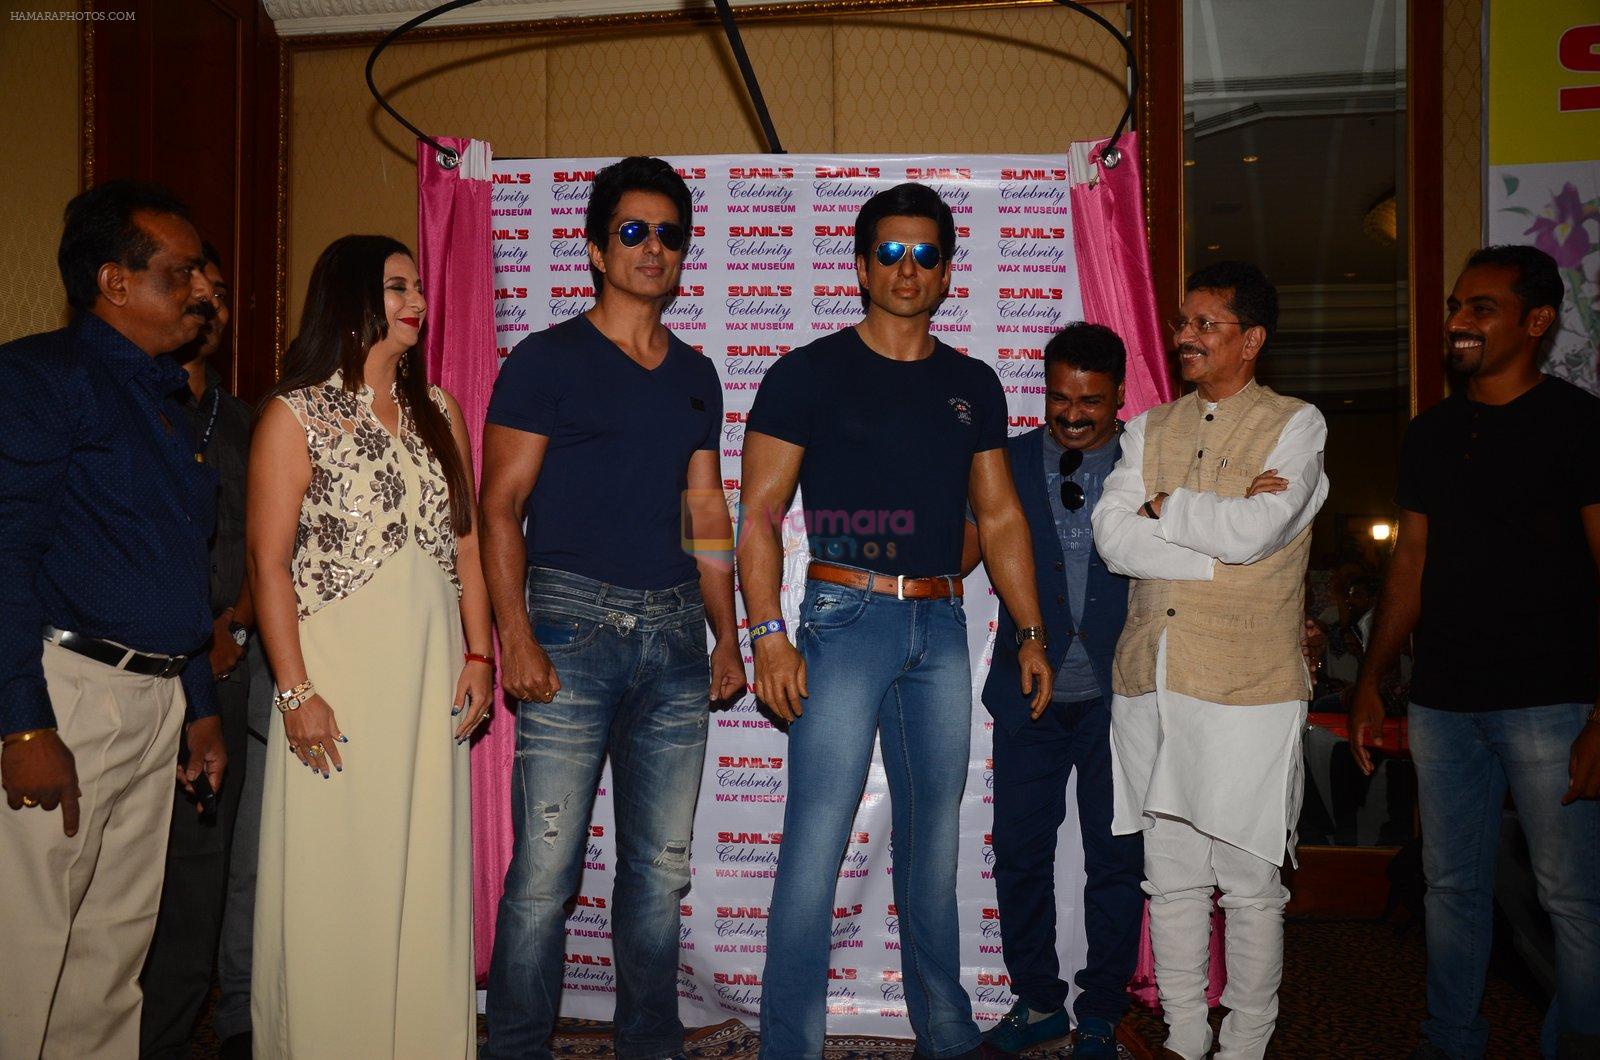 Sonu Sood's wax statue unveiled in Mumbai on 1st Oct 2016